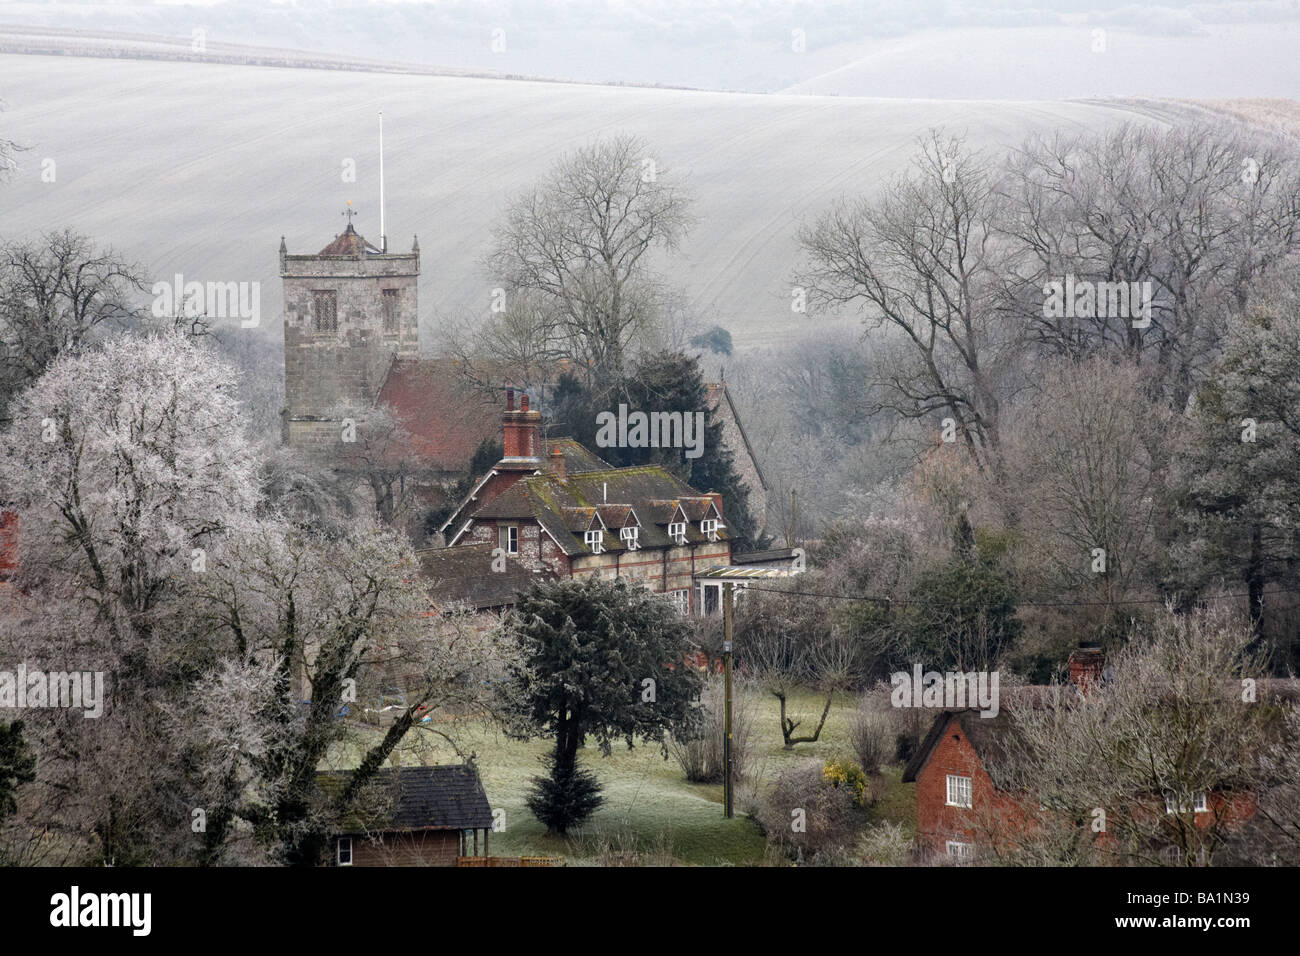 Village church, St. John the Baptist church, at Ebbesbourne Wake, Wiltshire UK covered with hoar frost hoarfrost  in January Stock Photo